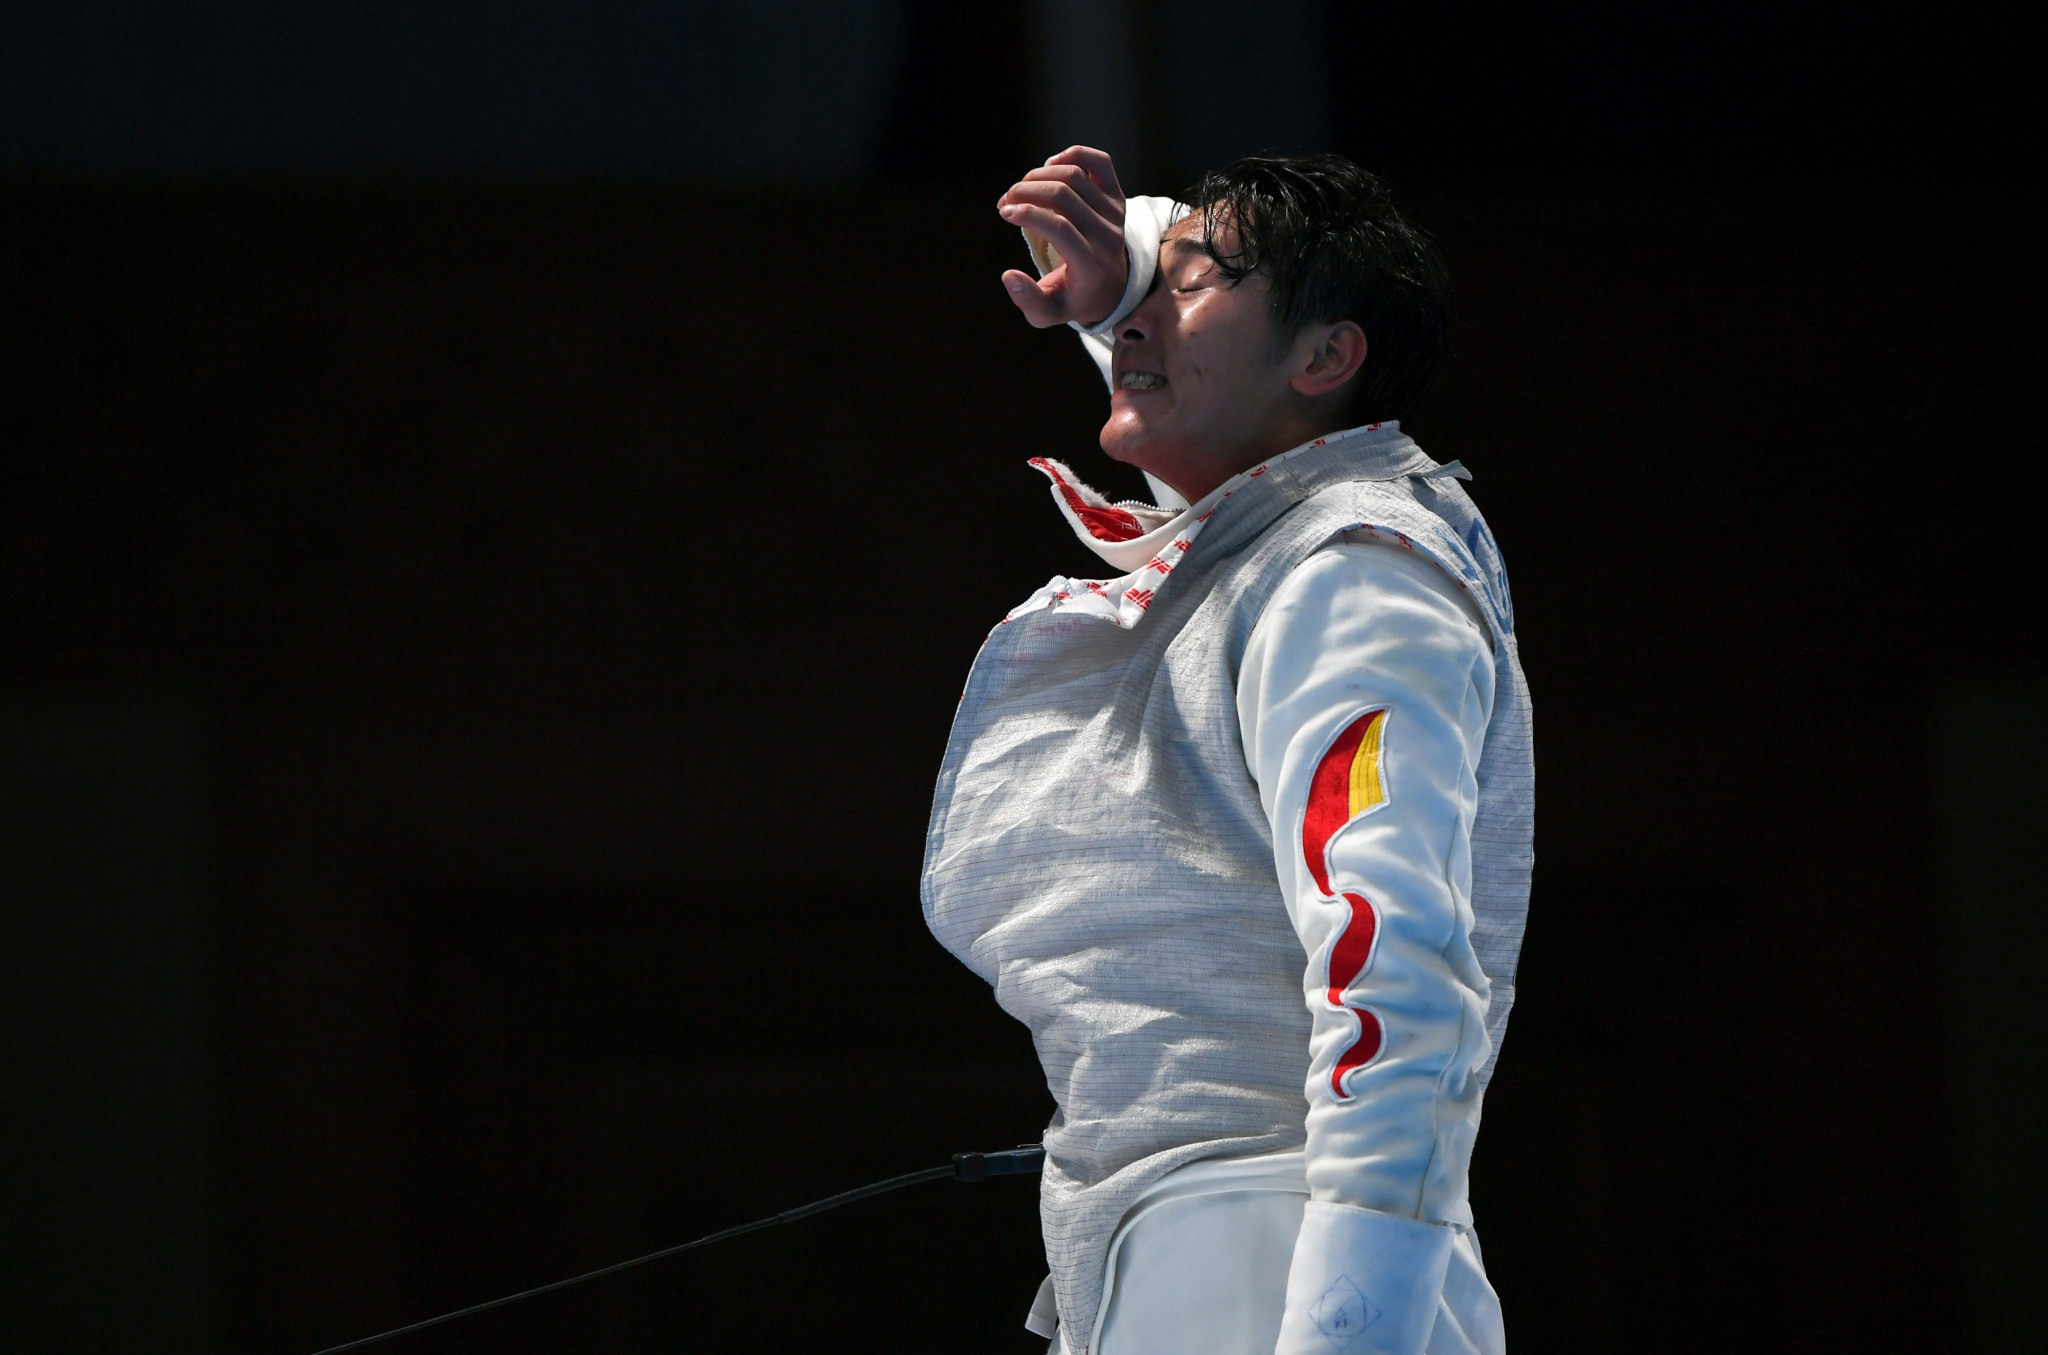 Asian Games champion Huang among 12 fencers to qualify for Tokyo 2020 at zonal tournaments